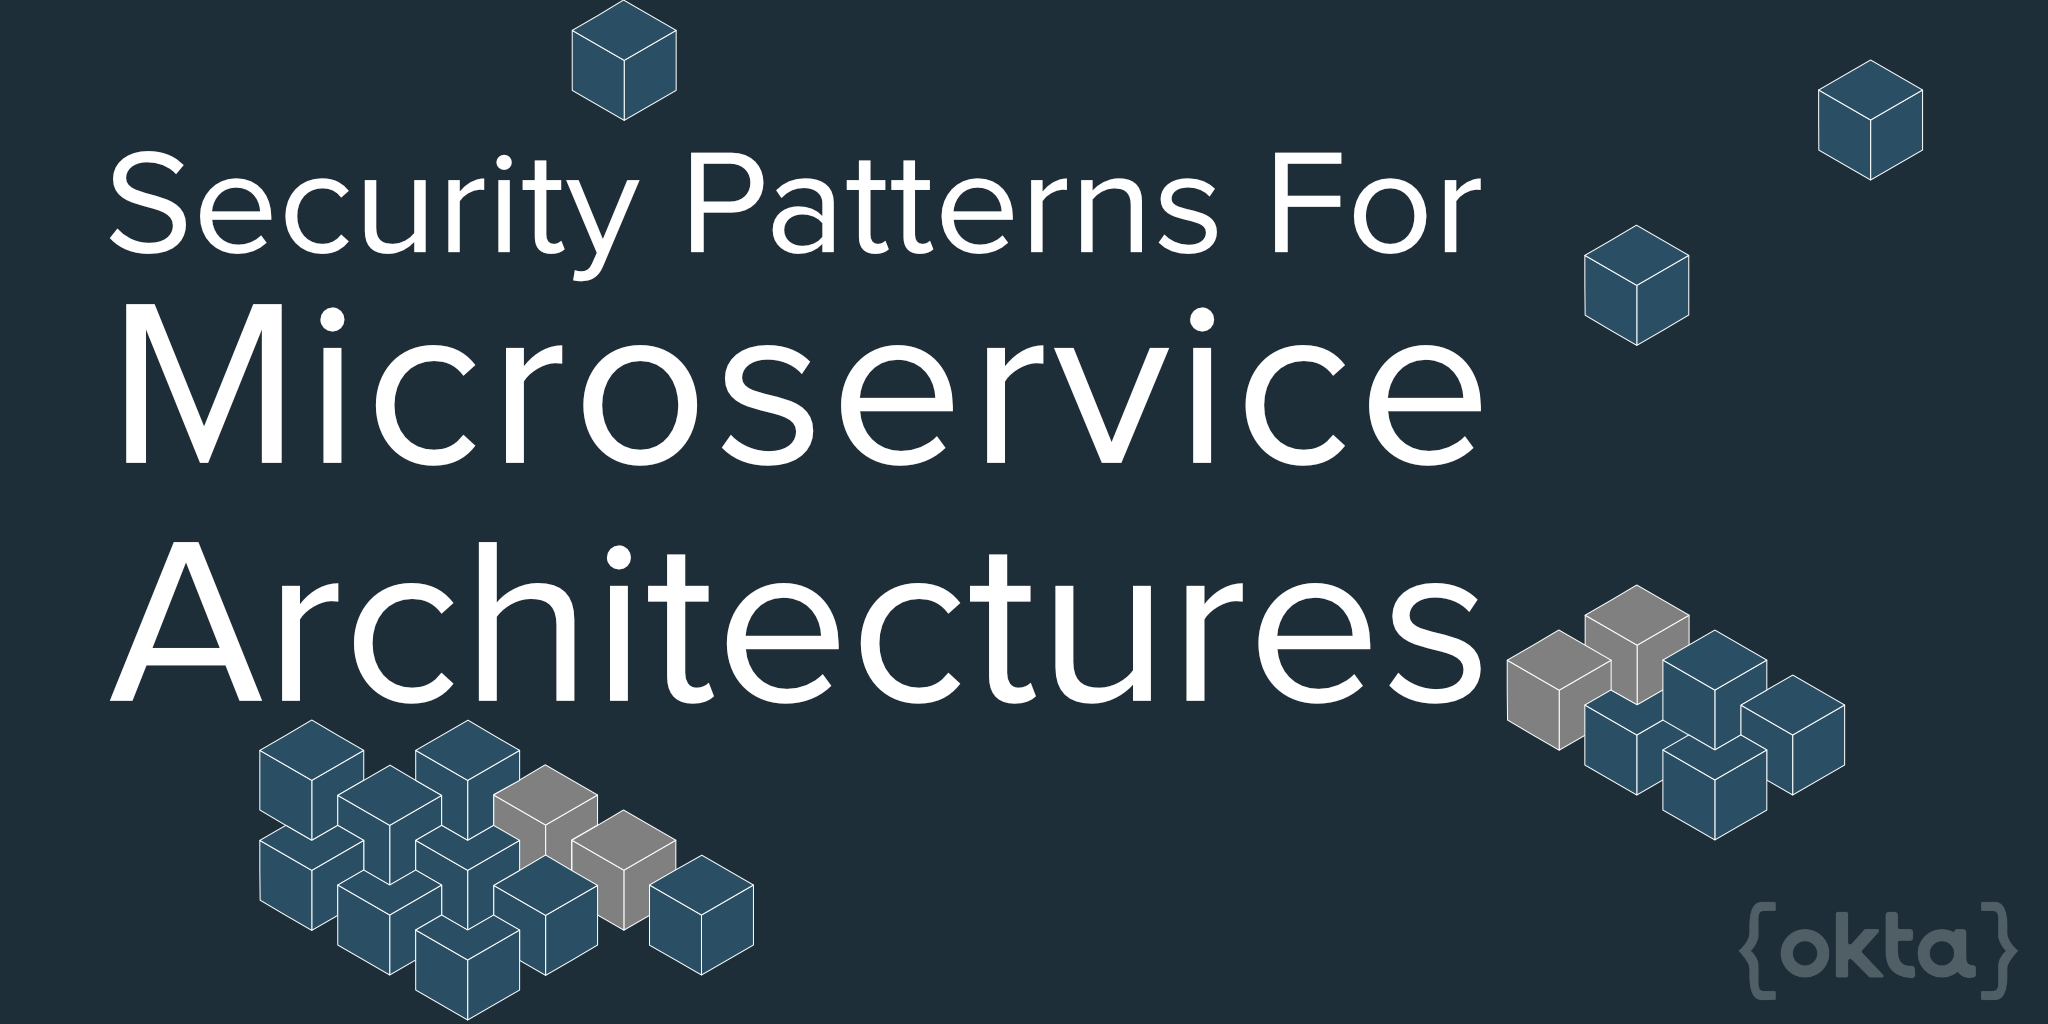 Security Patterns for Microservice Architectures